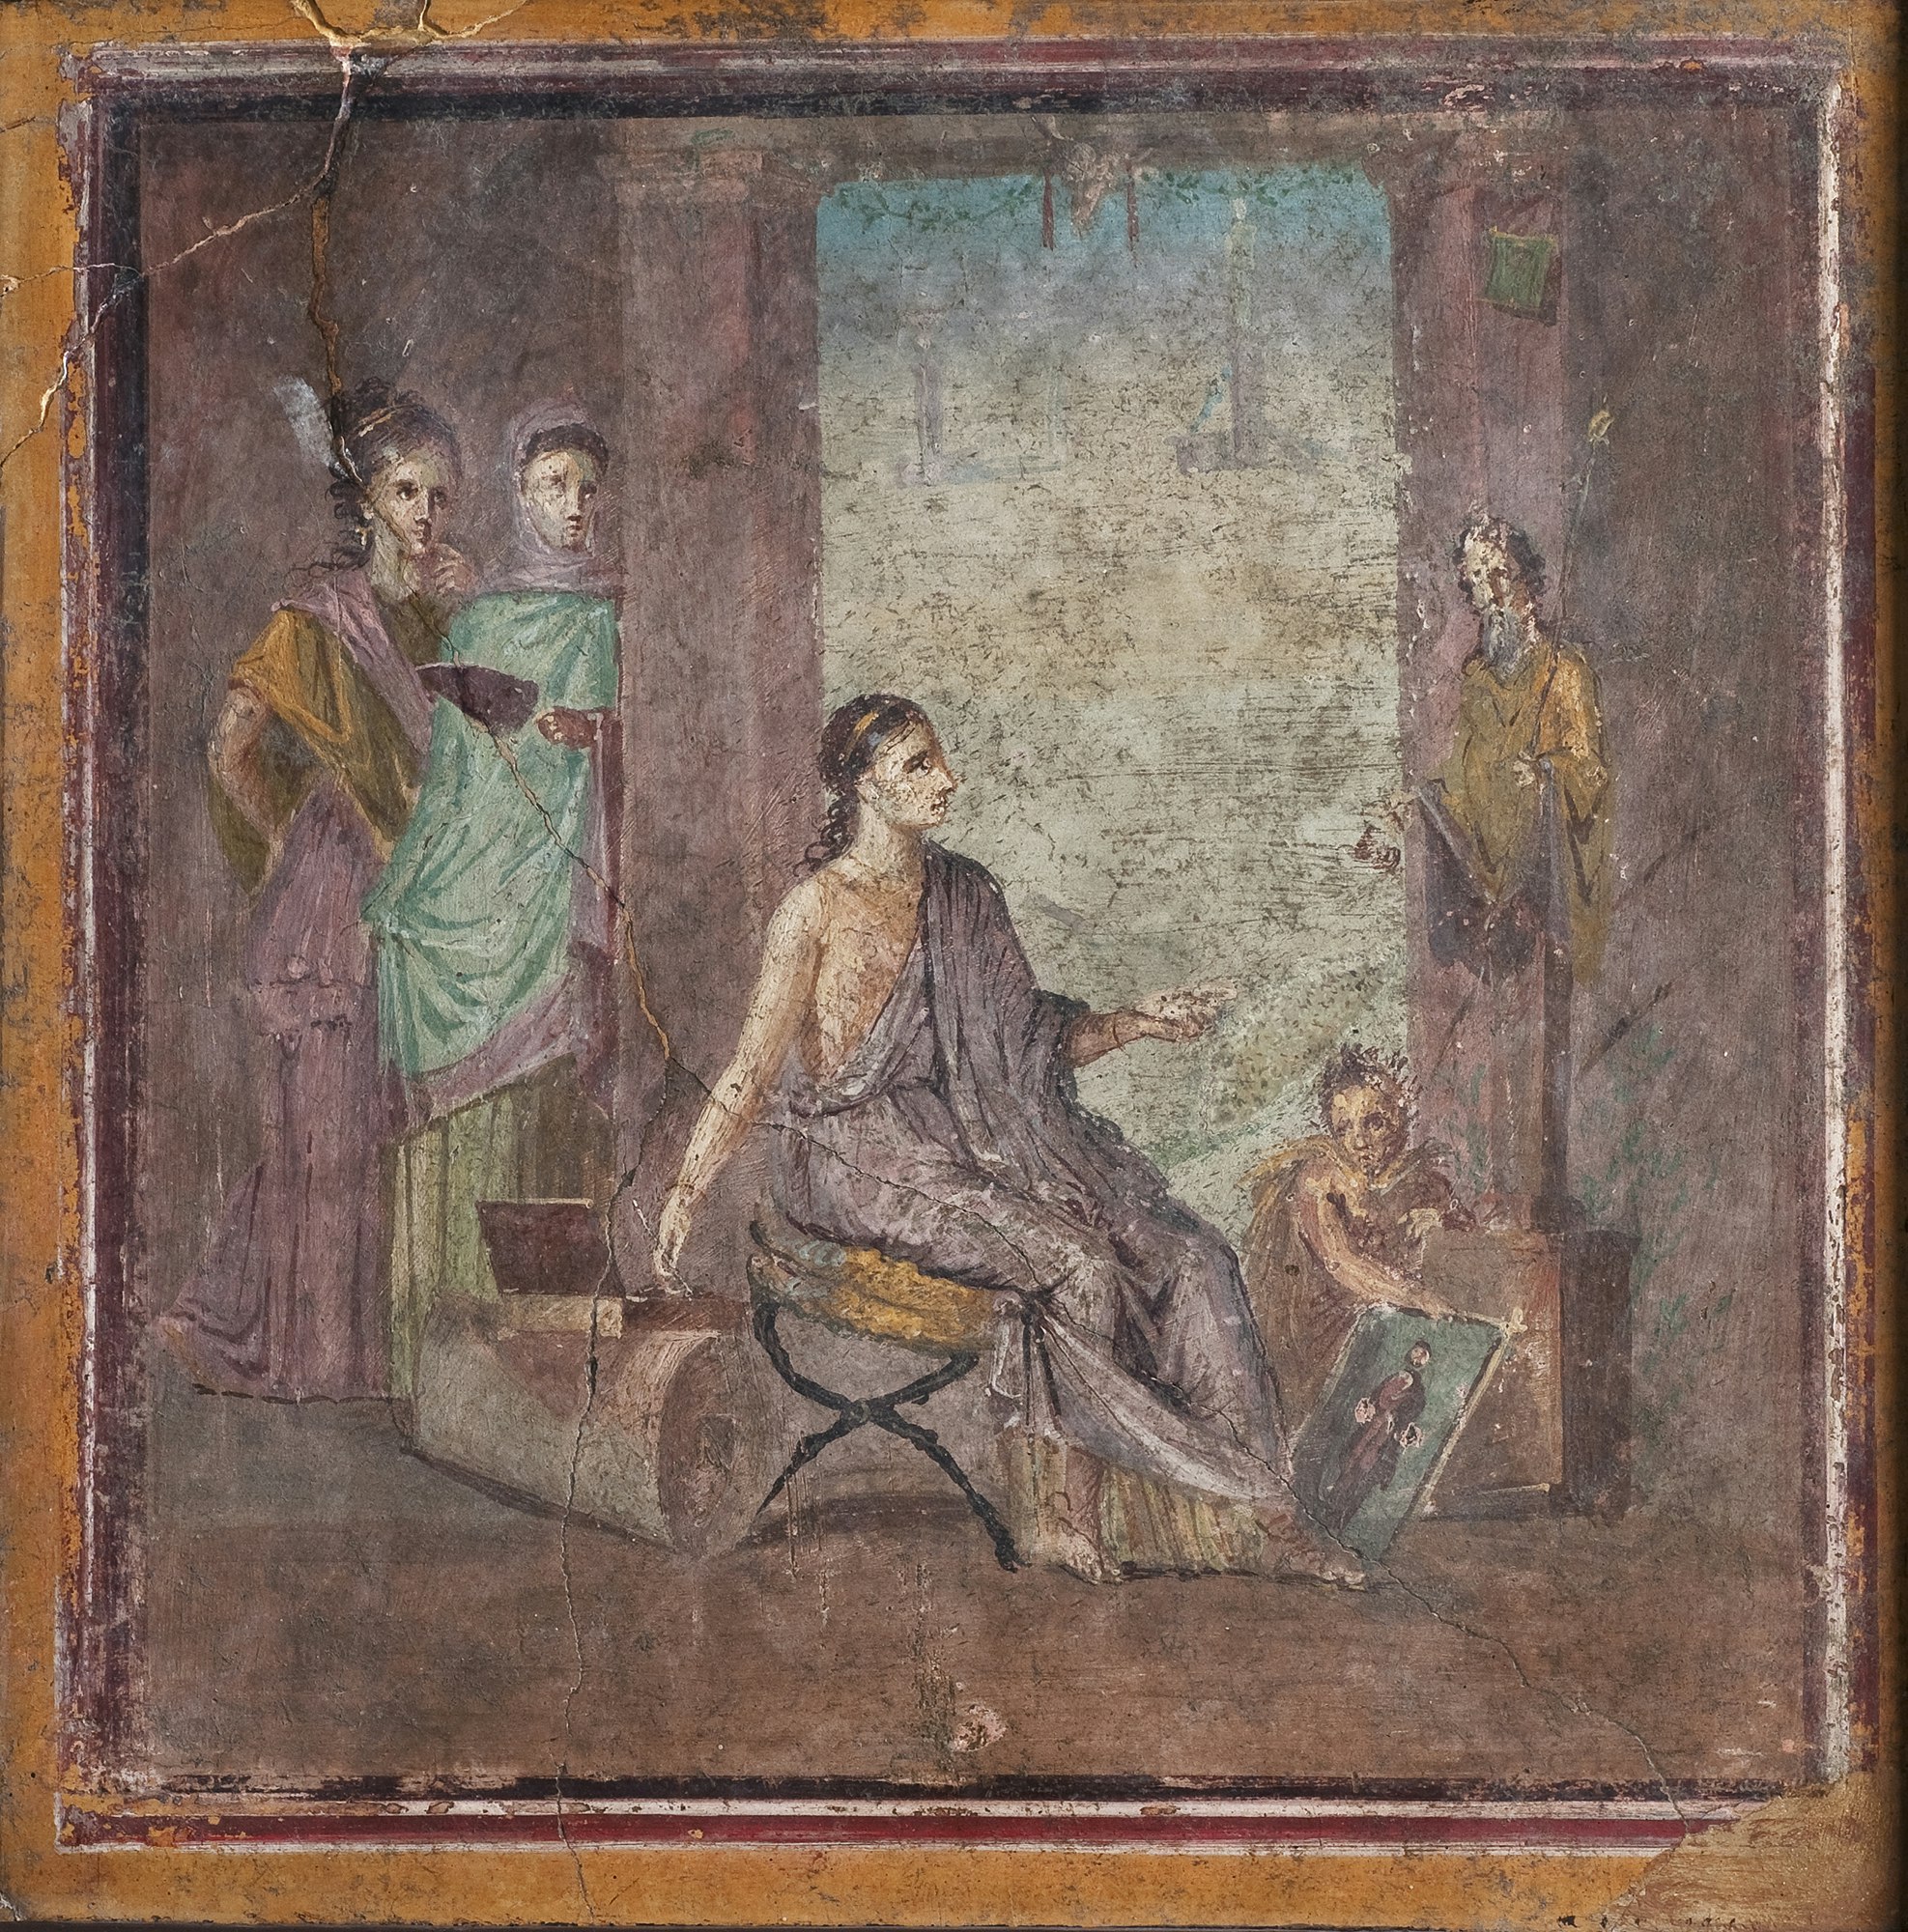 <em>Painter at work</em>, 1st century CE. Fresco. House of the Surgeon, Pompeii. © Photographic Archive, National Archaeological Museum of Naples.